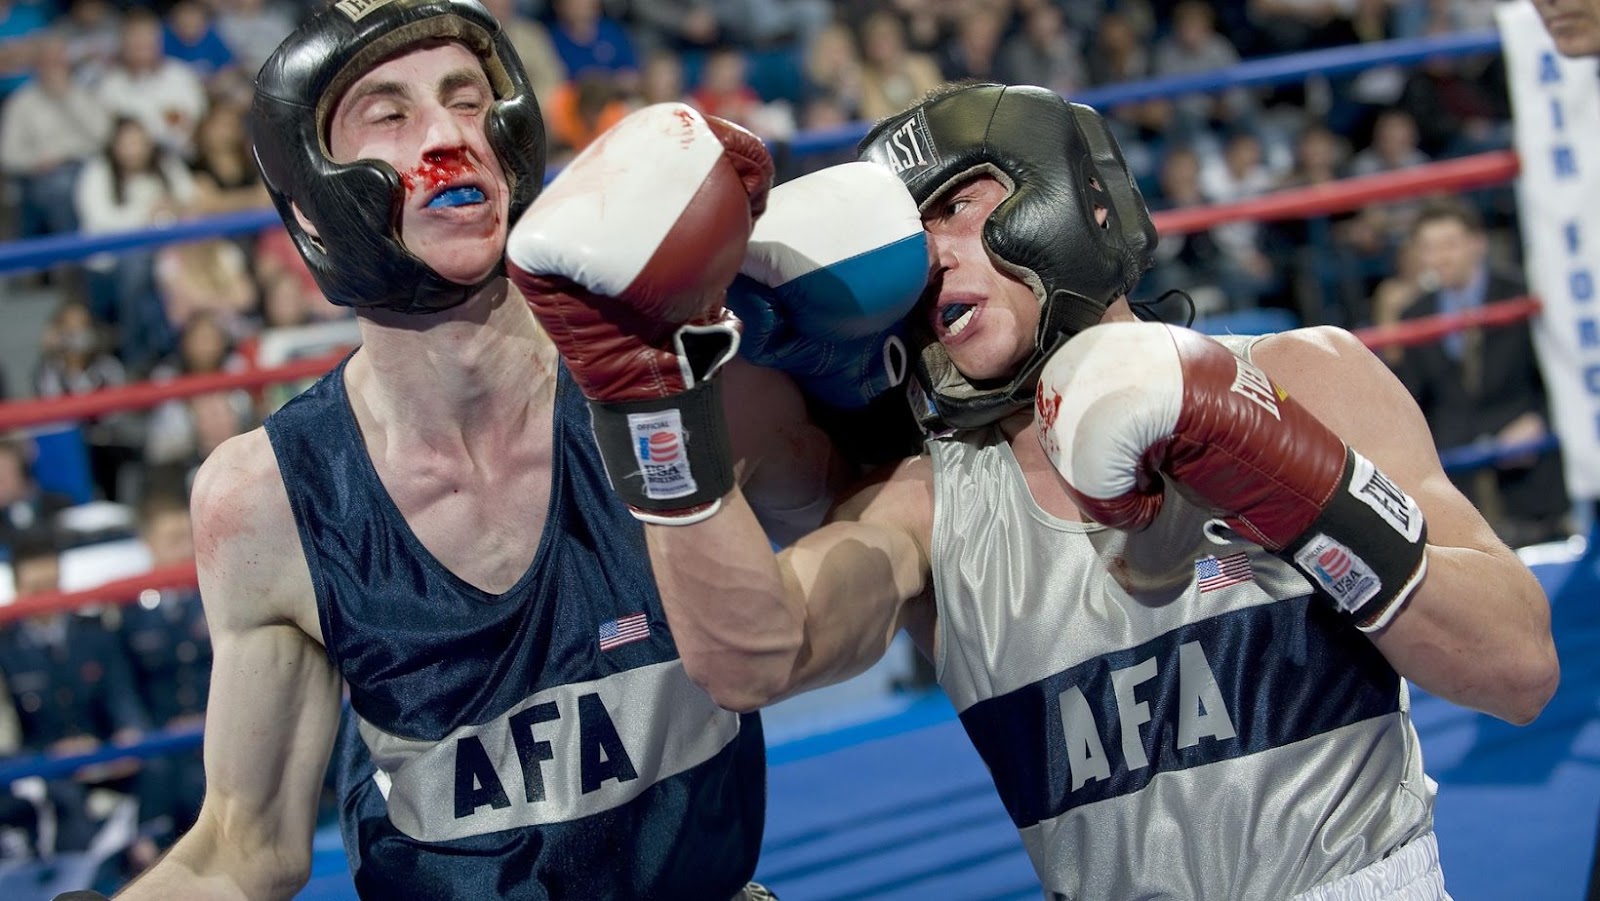 Different Boxing Events at the Olympics